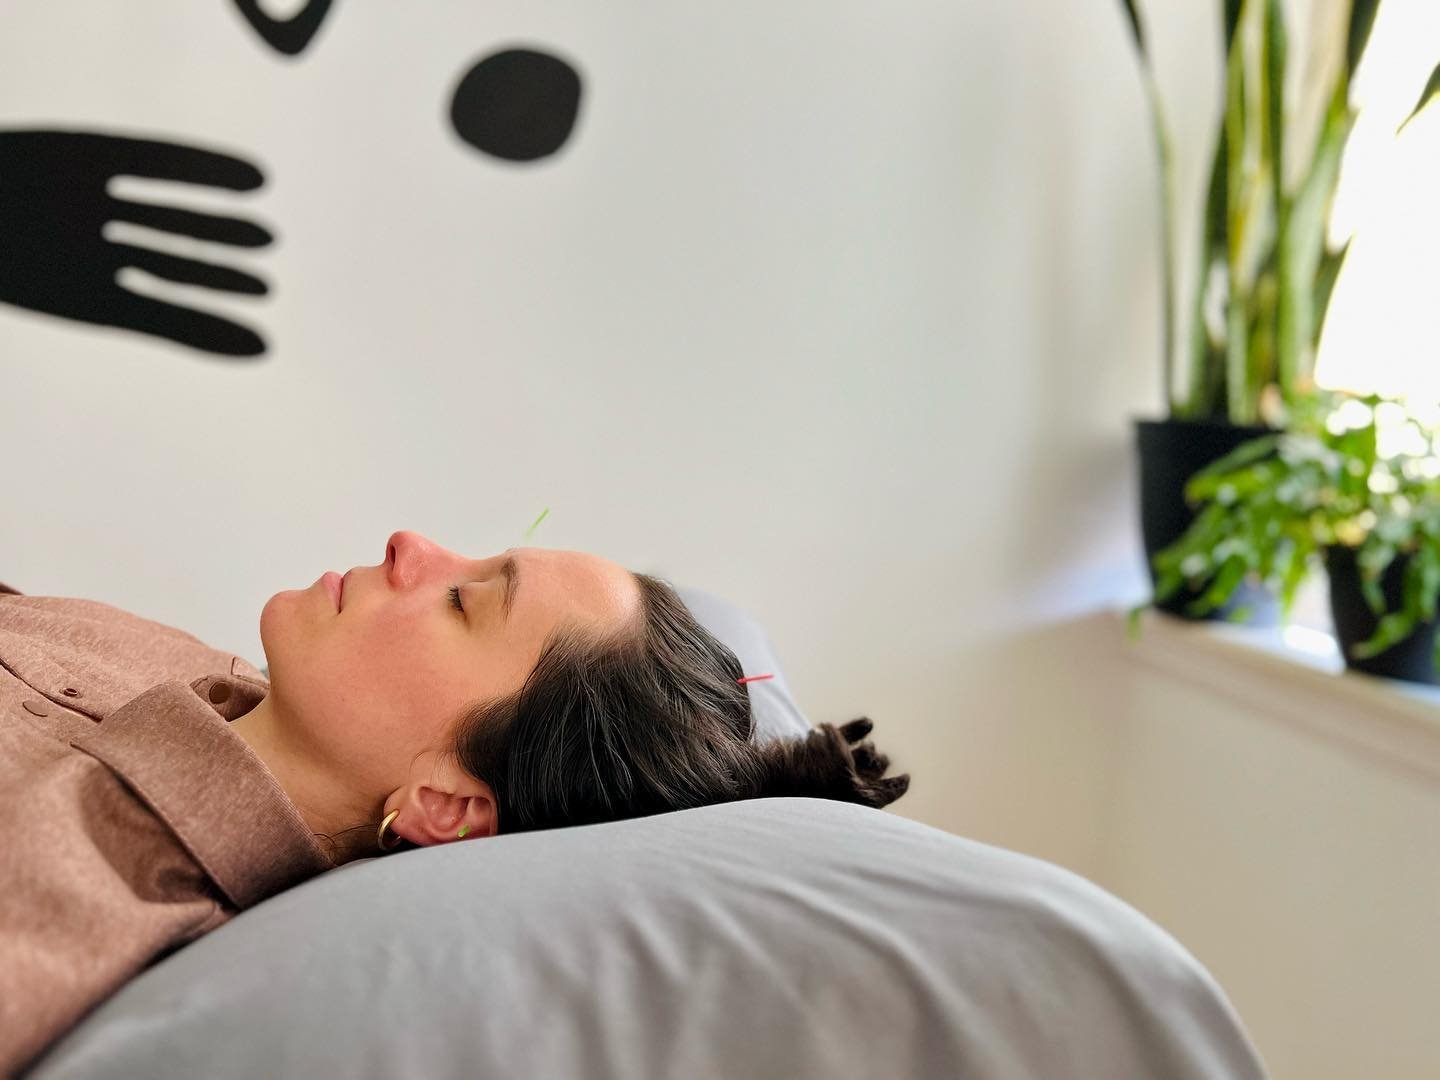 We have openings at the Acupuncture Lounge this Friday, 3/3 at @taou_studio &mdash; Link in bio for availability and sign up. 

&mdash; 

The Acupuncture Lounge provides 40-minute individualized acupuncture treatments in a semi-private, small-group s